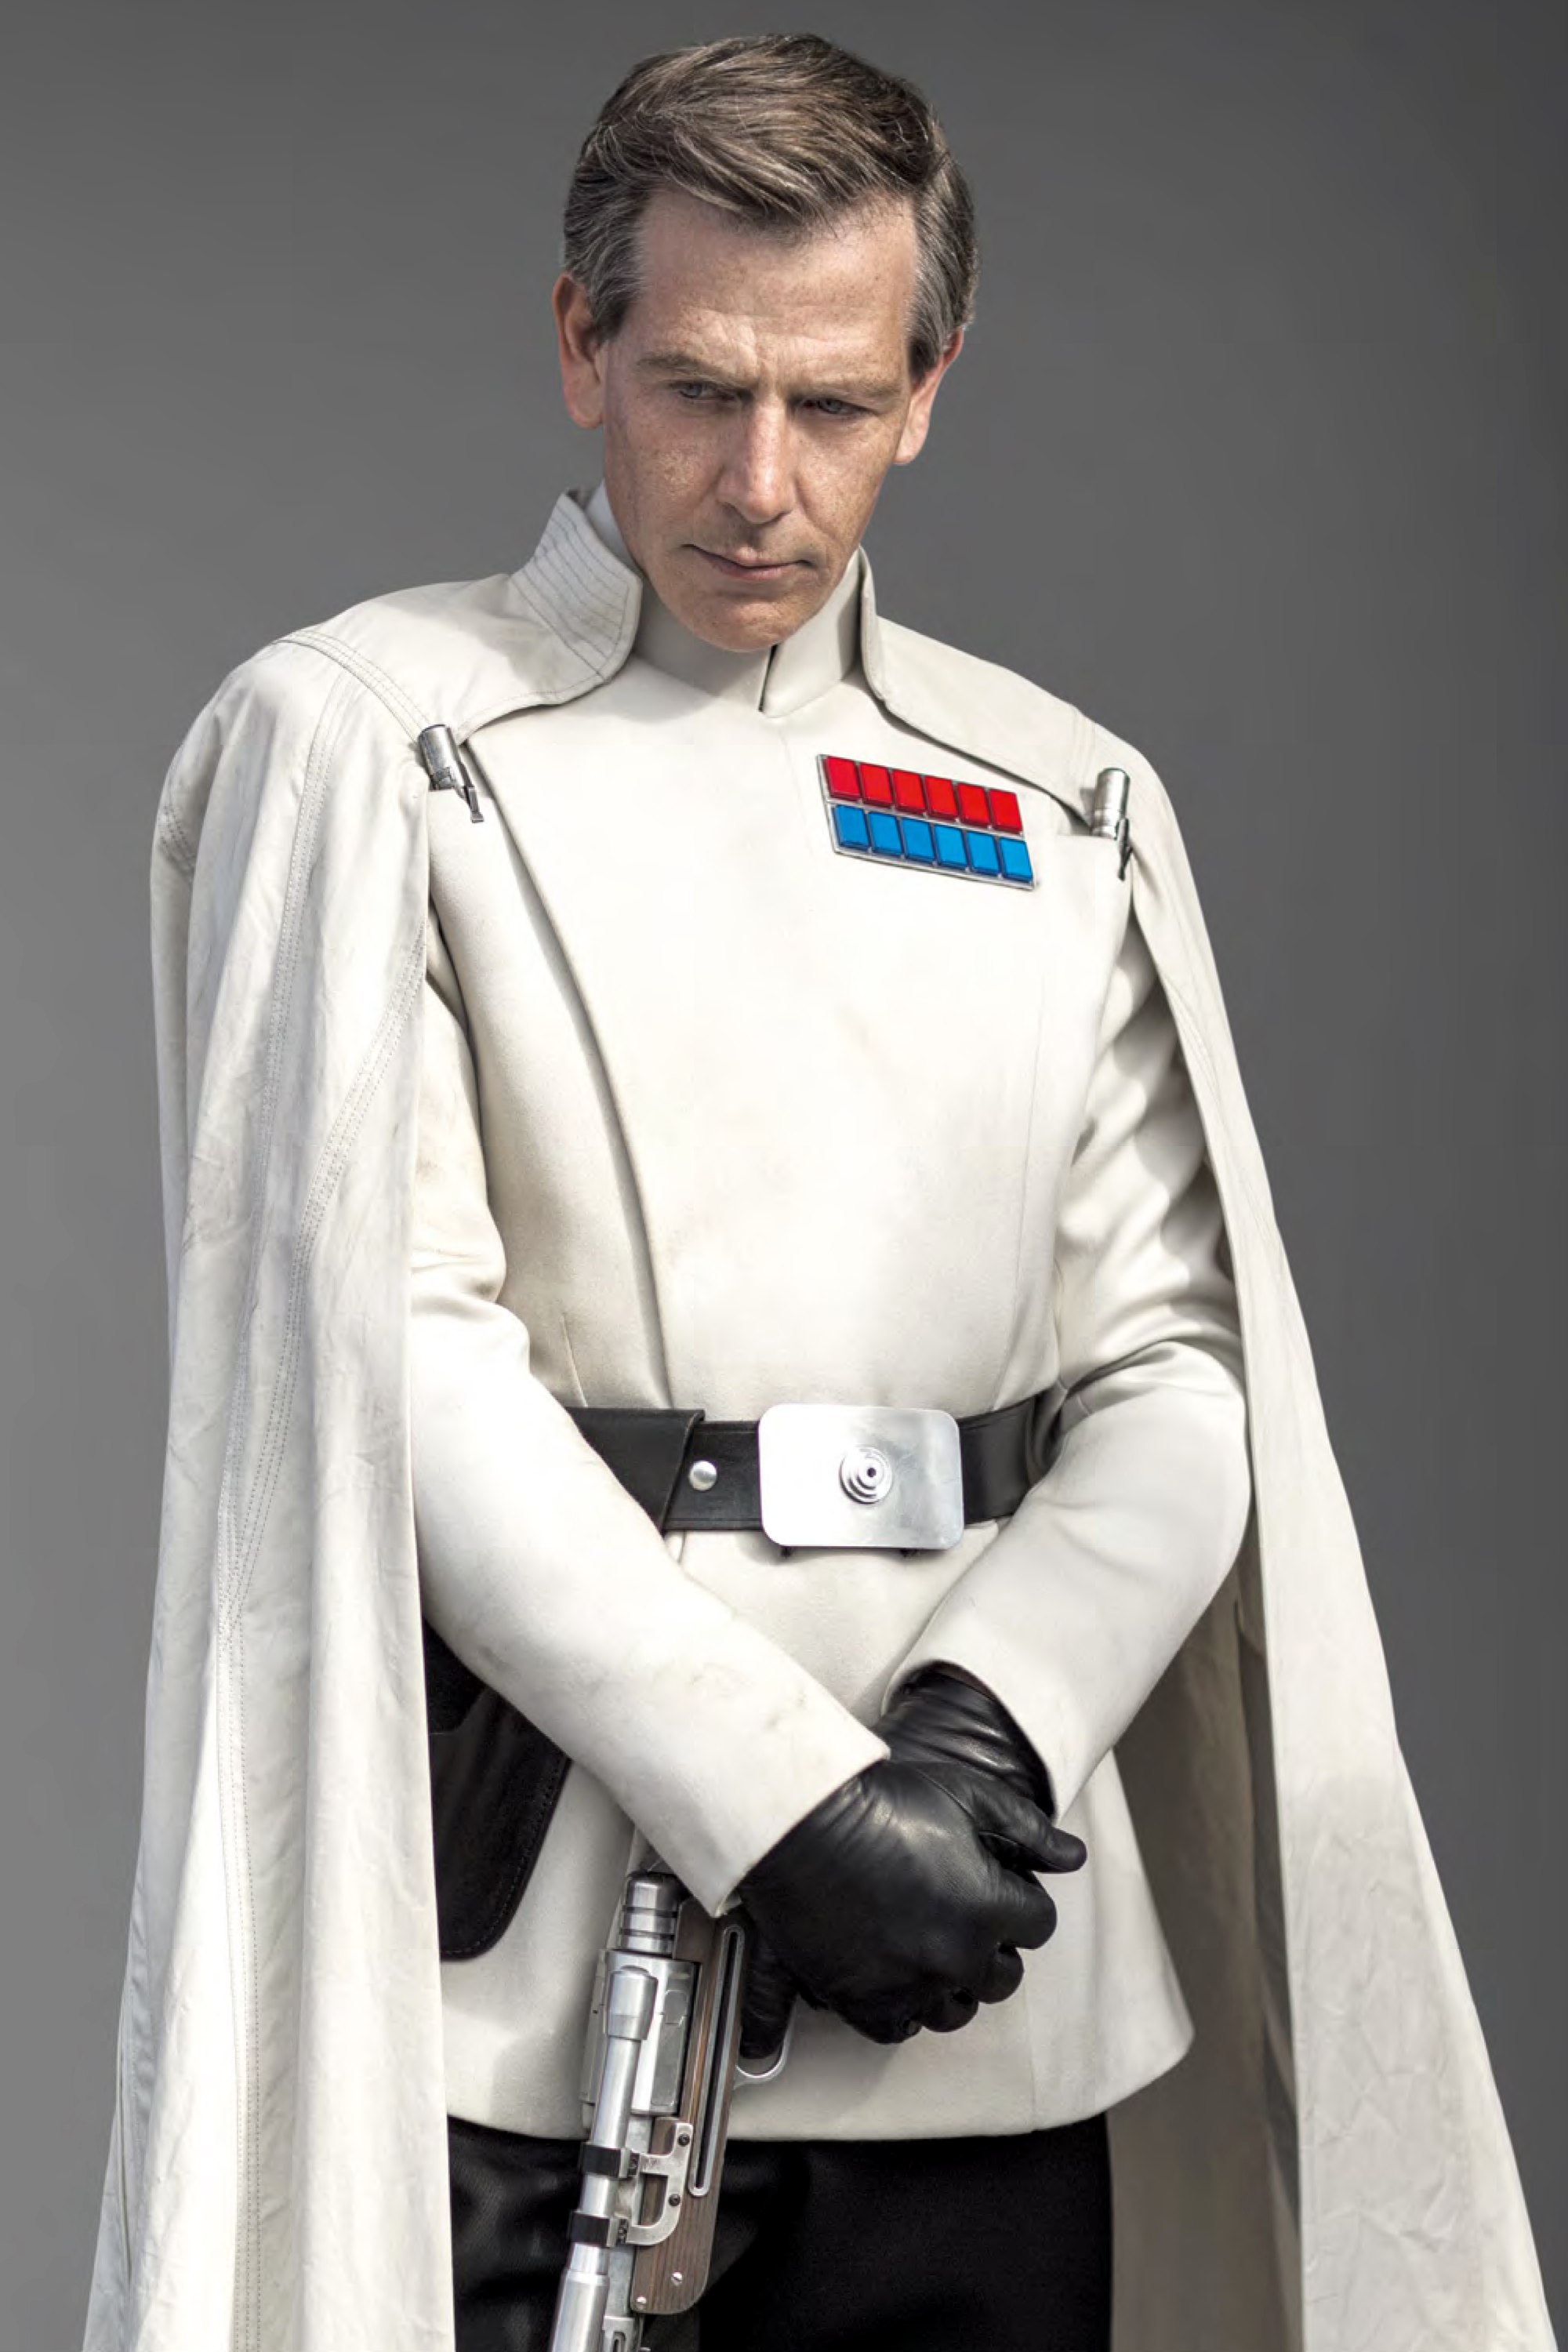 Krennic was an absolute must for me, he is perfect to lead my Scarif Garris...